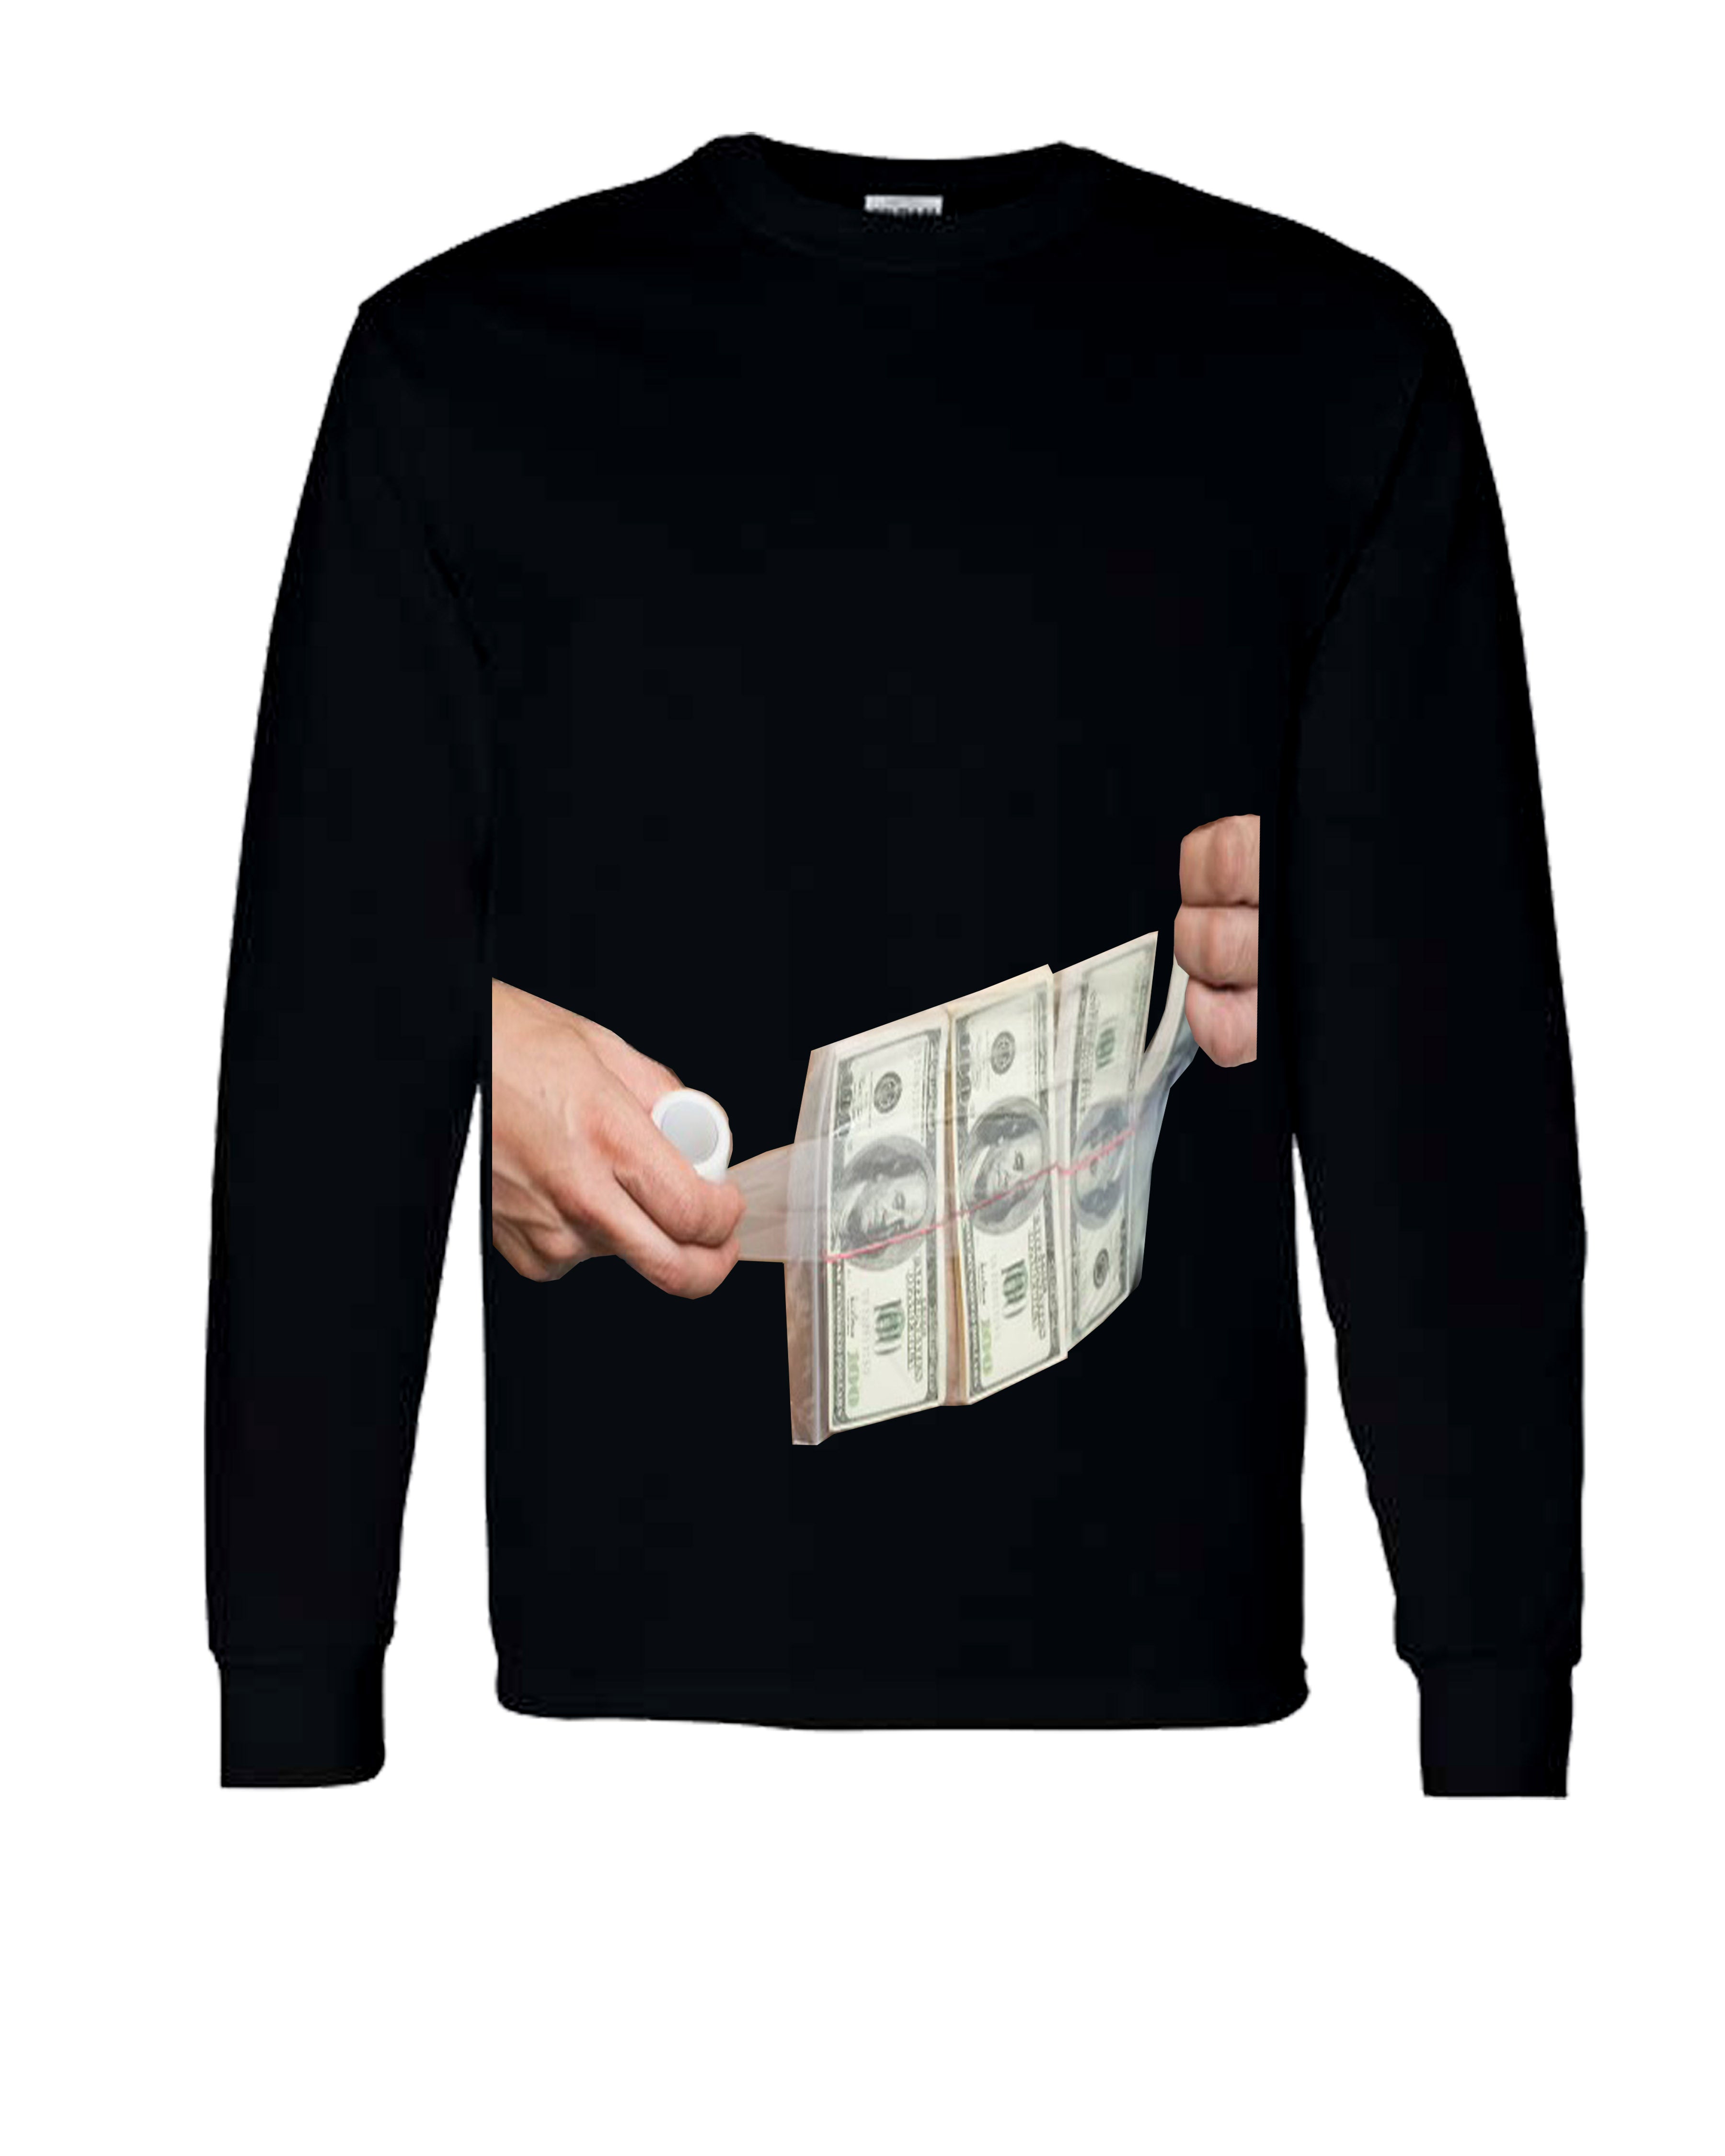 Stay Strapped Long Sleeve T-Shirt